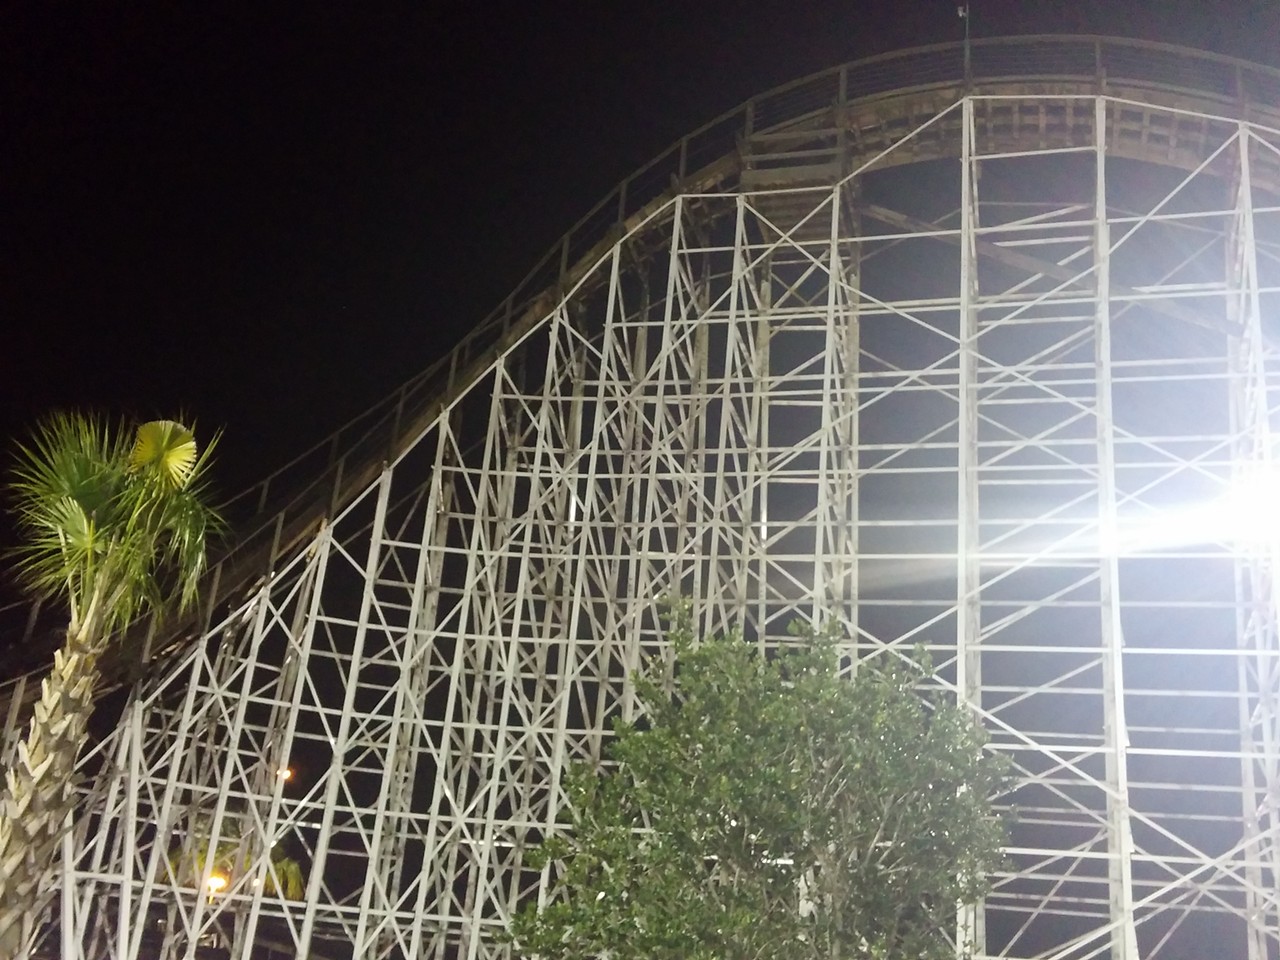 White Lightning at Fun SpotRelated: 13 reasons to love the expansion of Orlando's Fun Spot